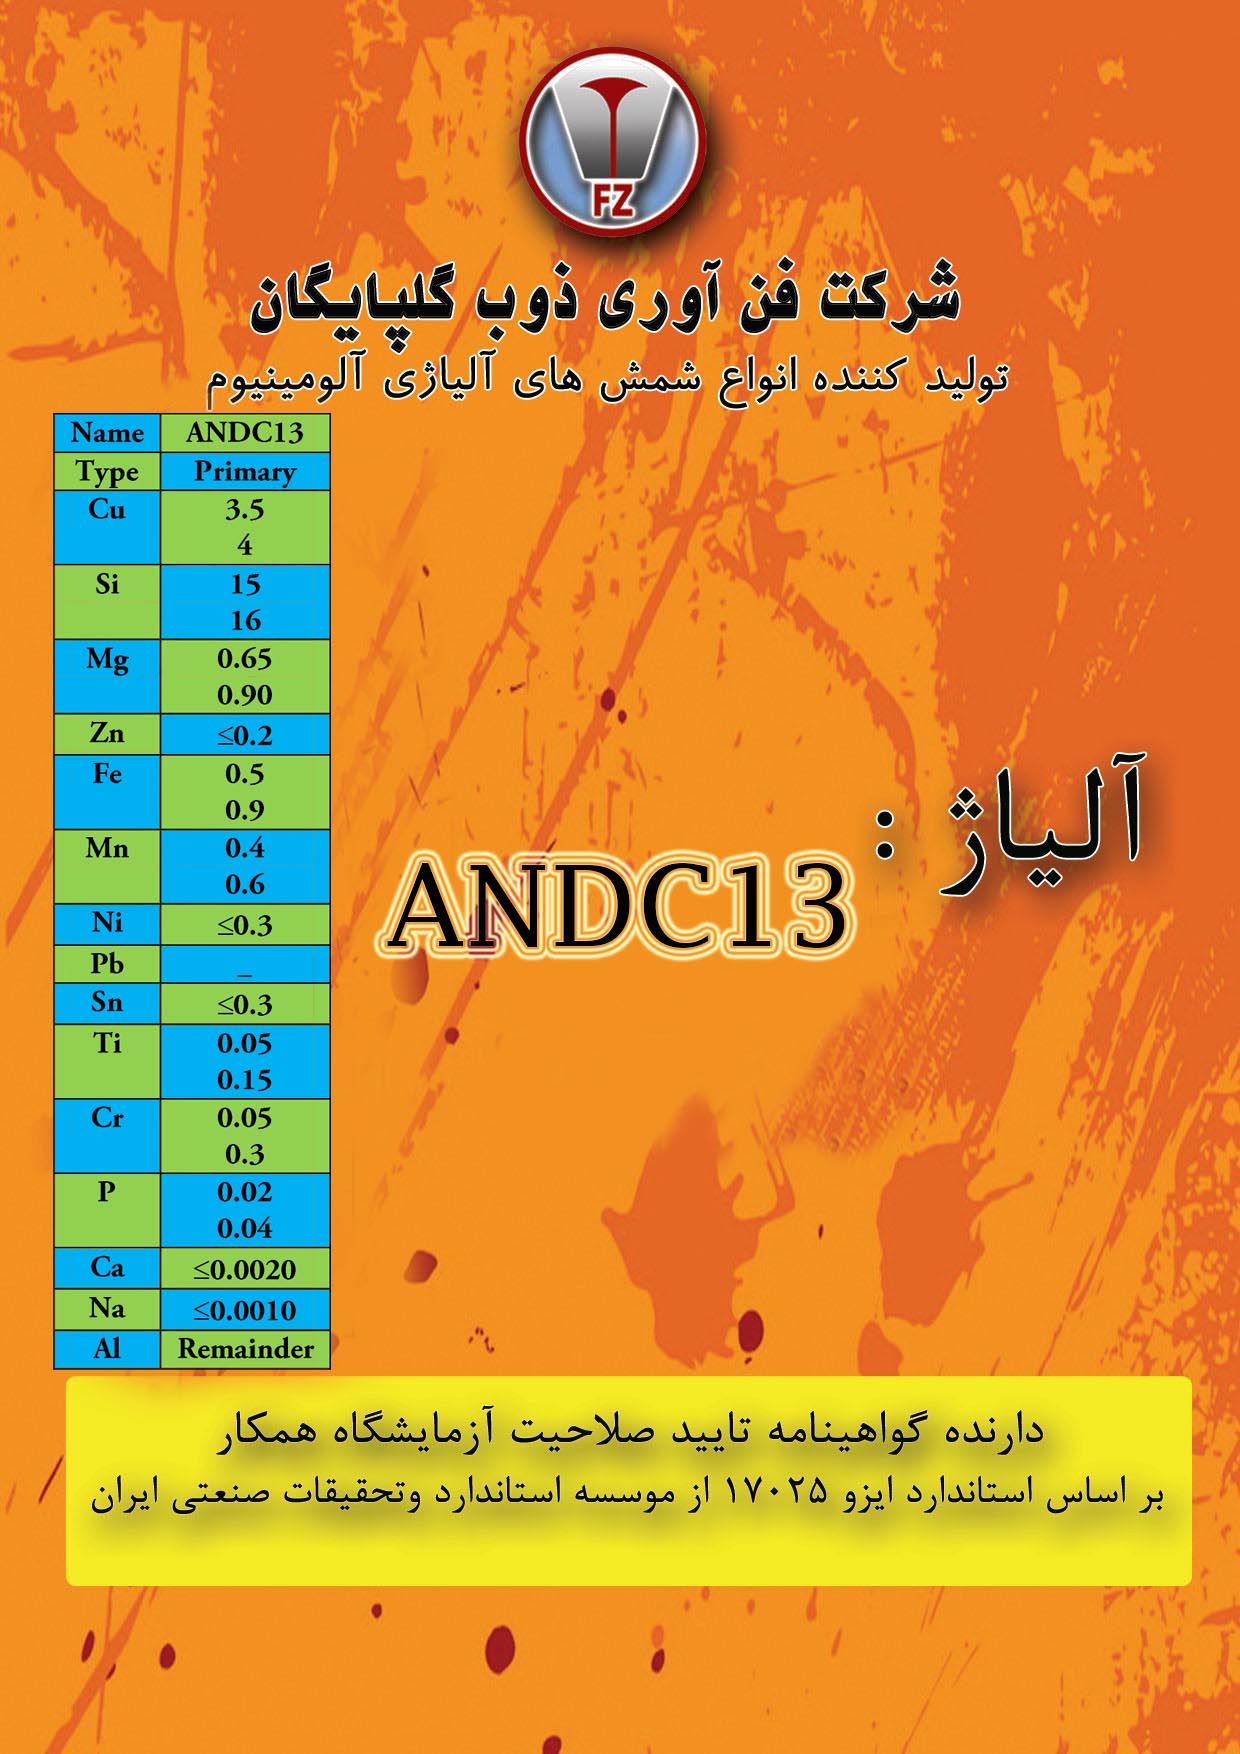 andc13